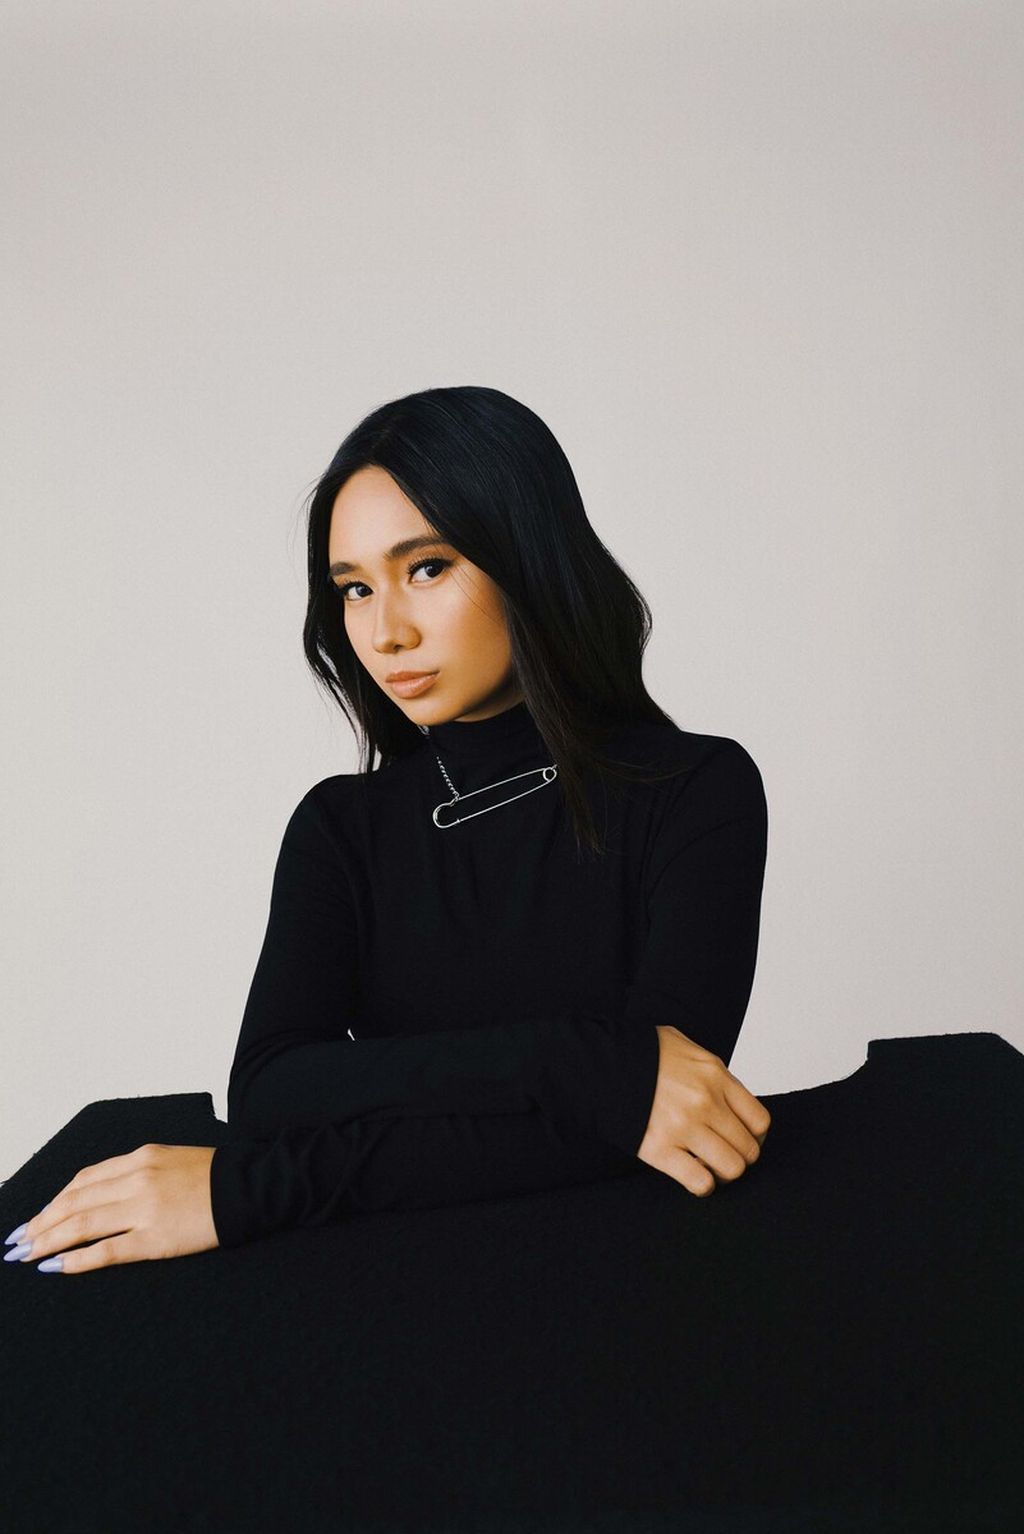 Indonesian-born singer Nicole Zefanya, or Niki, is part of the 88Rising management that supports musicians of Asian descent in the United States, along with Rich Brian.